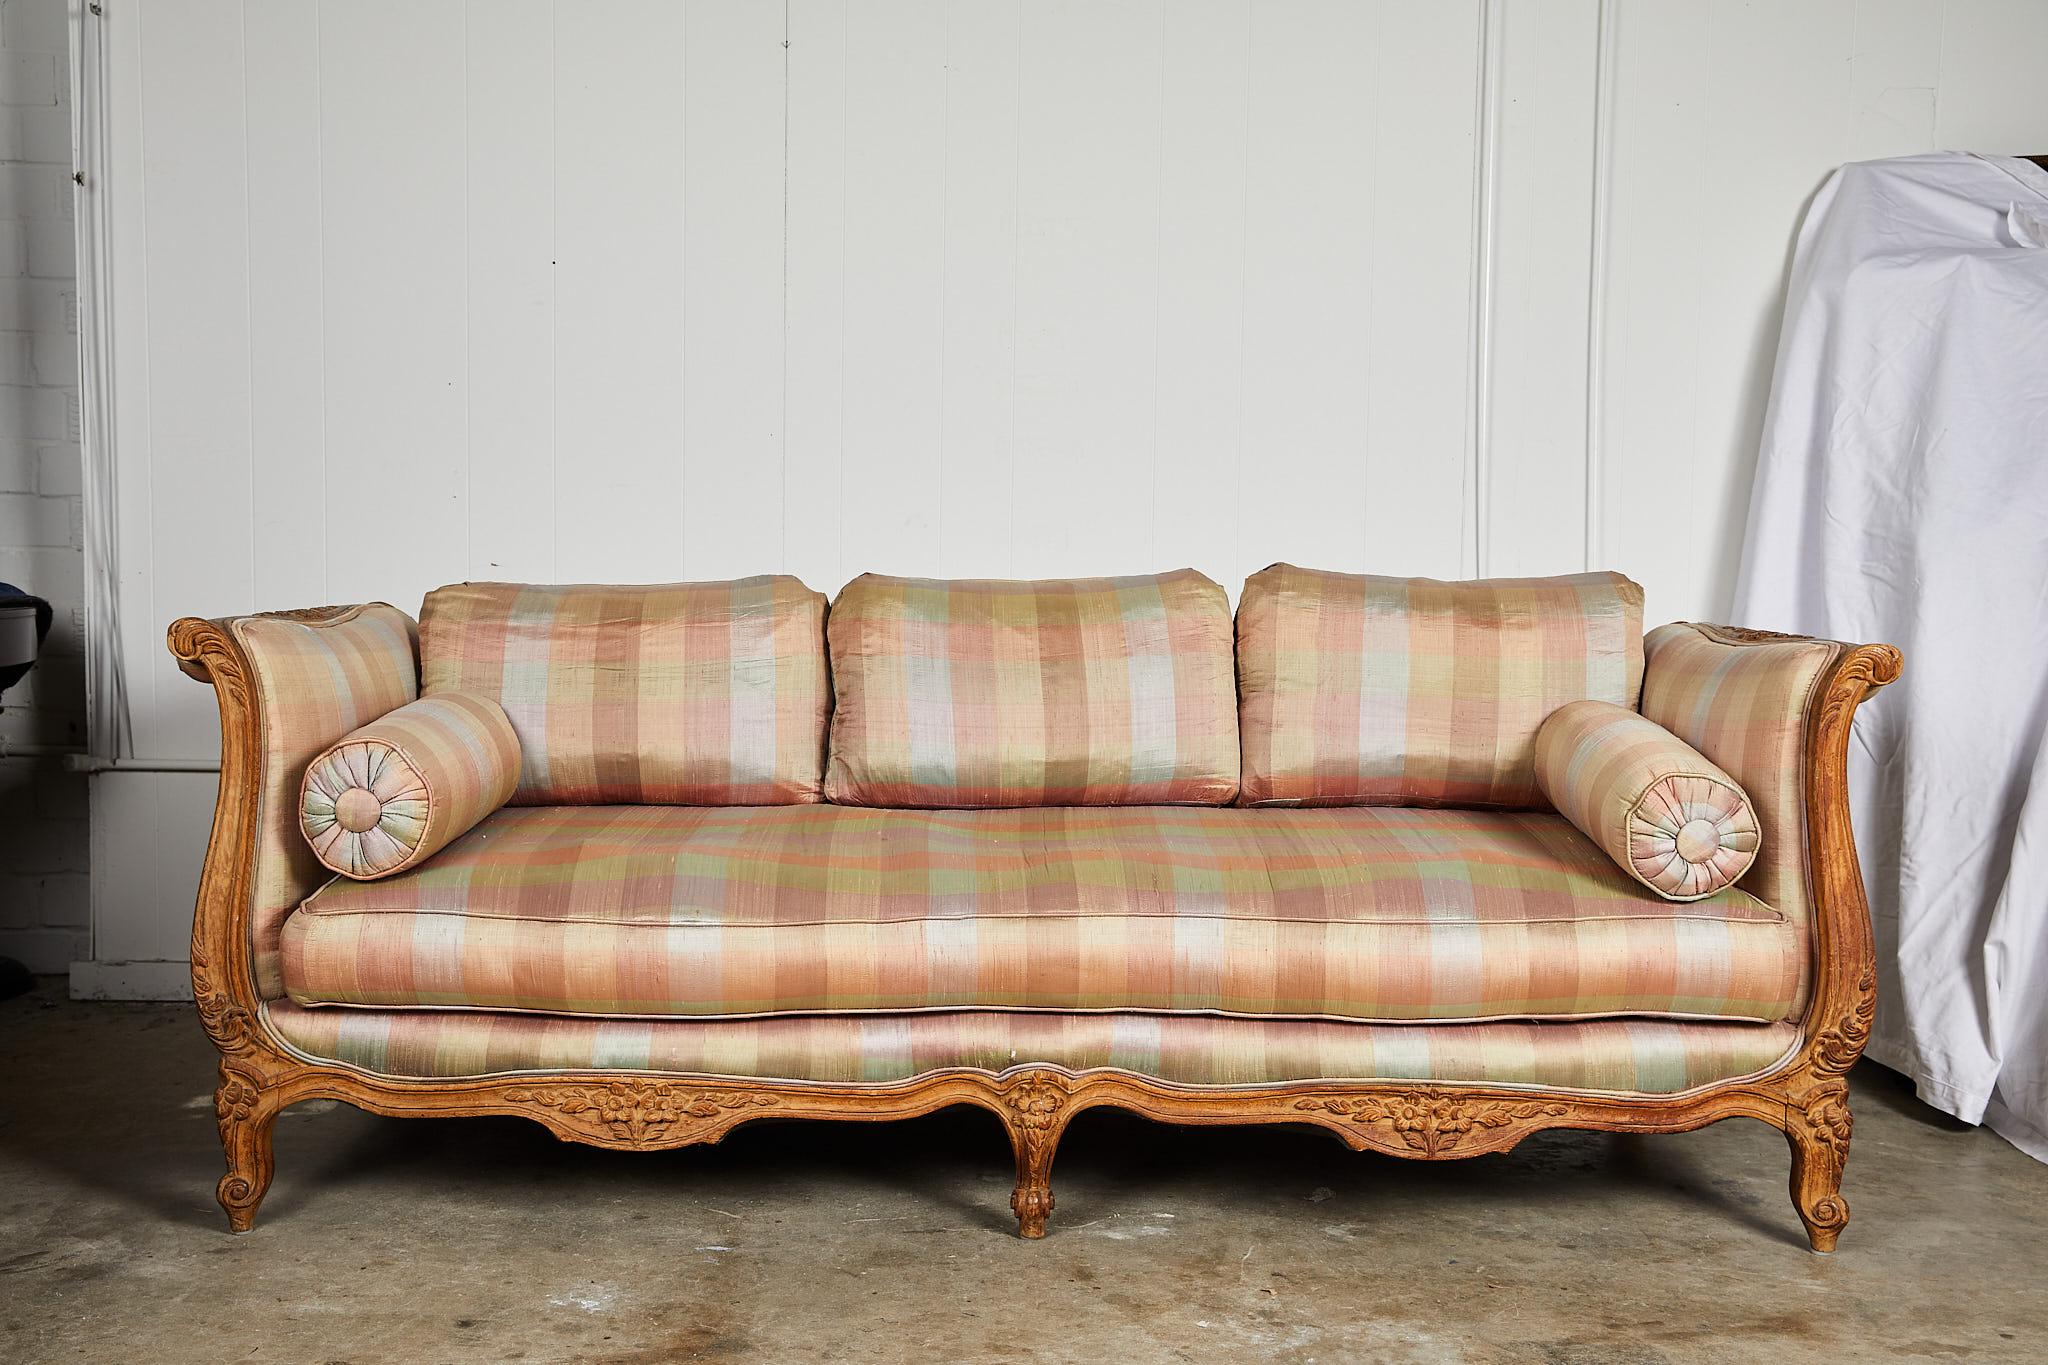 20th century Hollywood Regency sofa or daybed influenced by the French Louis XV aesthetic featuring a pickled and carved wood frame and upholstered in a striped silk. The generously proportioned sofa frame and down blend cushions are in great